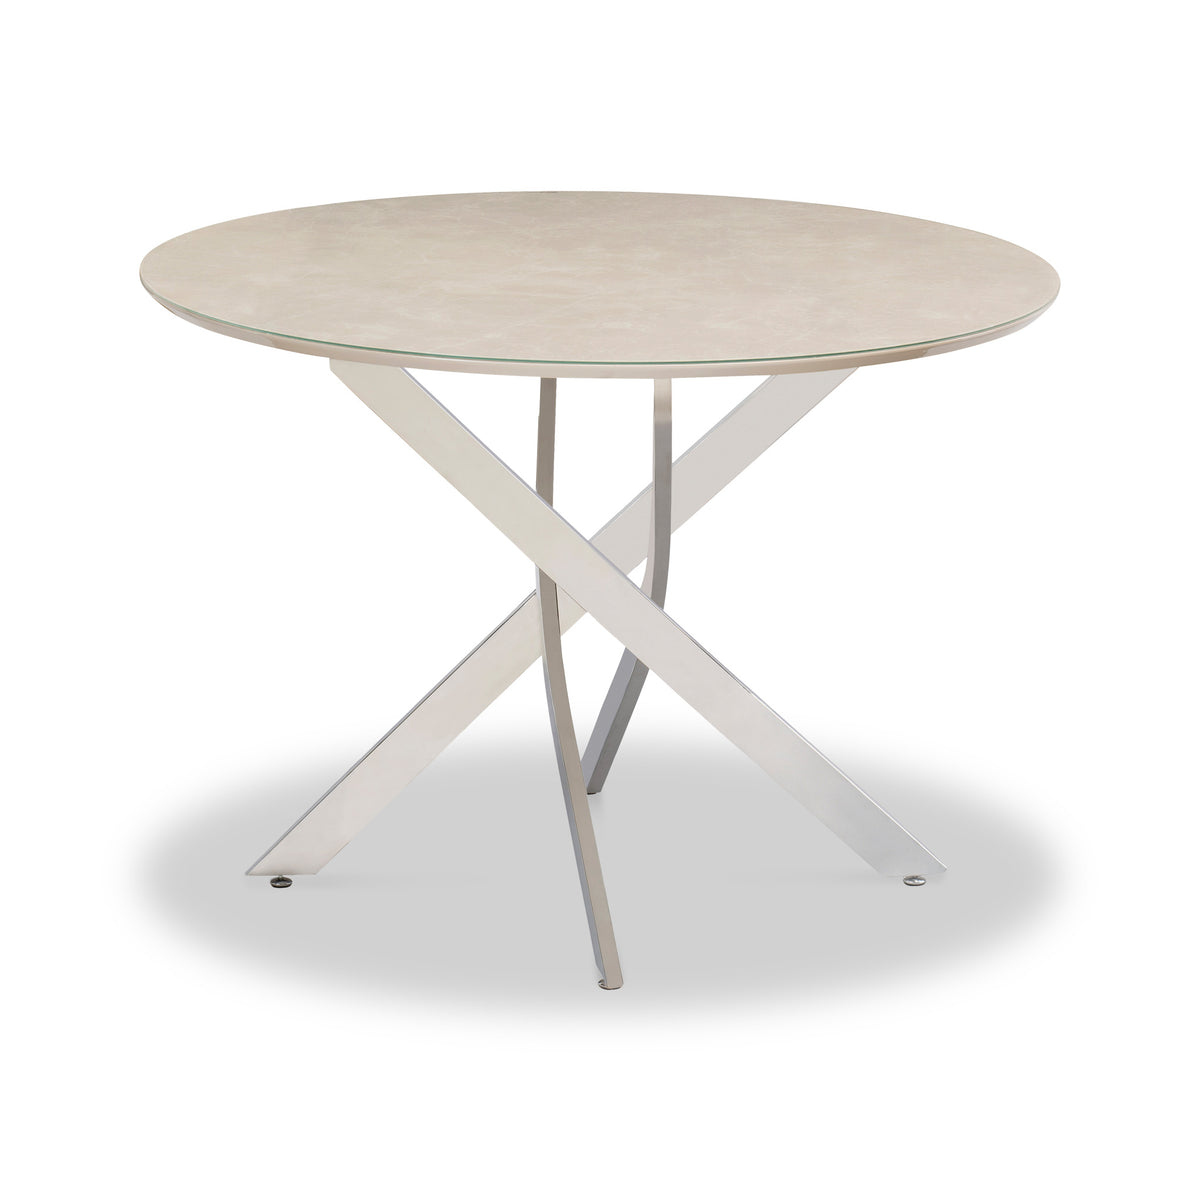 Lewis white Marble Effect Round Dining Table from Roseland